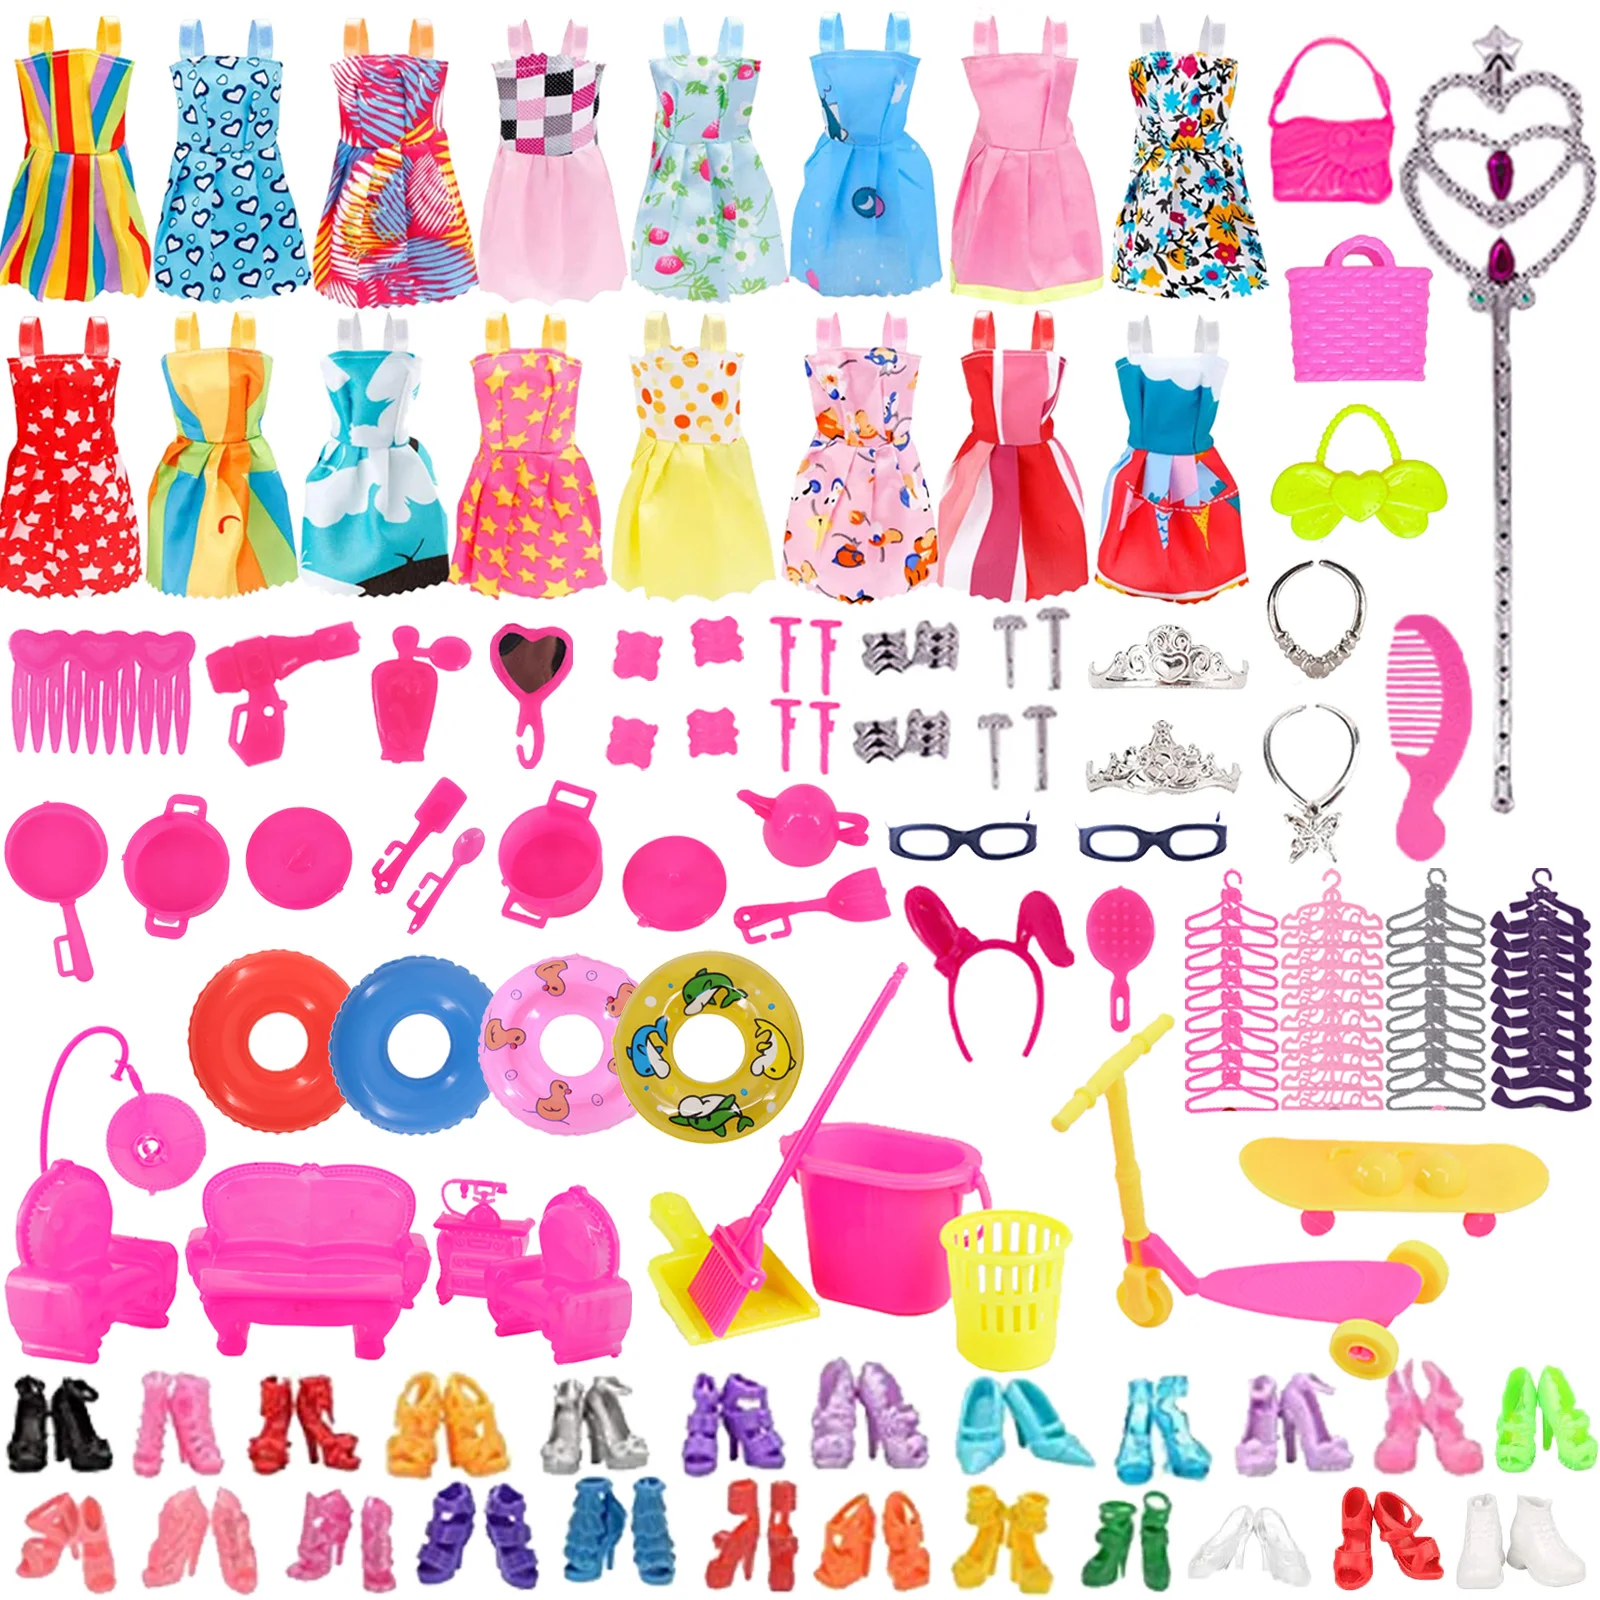 

76PCS/Set Barbies Clothes Furniture Accessories For 11.5inch Barbies Doll&1/6 BJD Blythe Noble Dinner Party Dress ,Girl's Gift